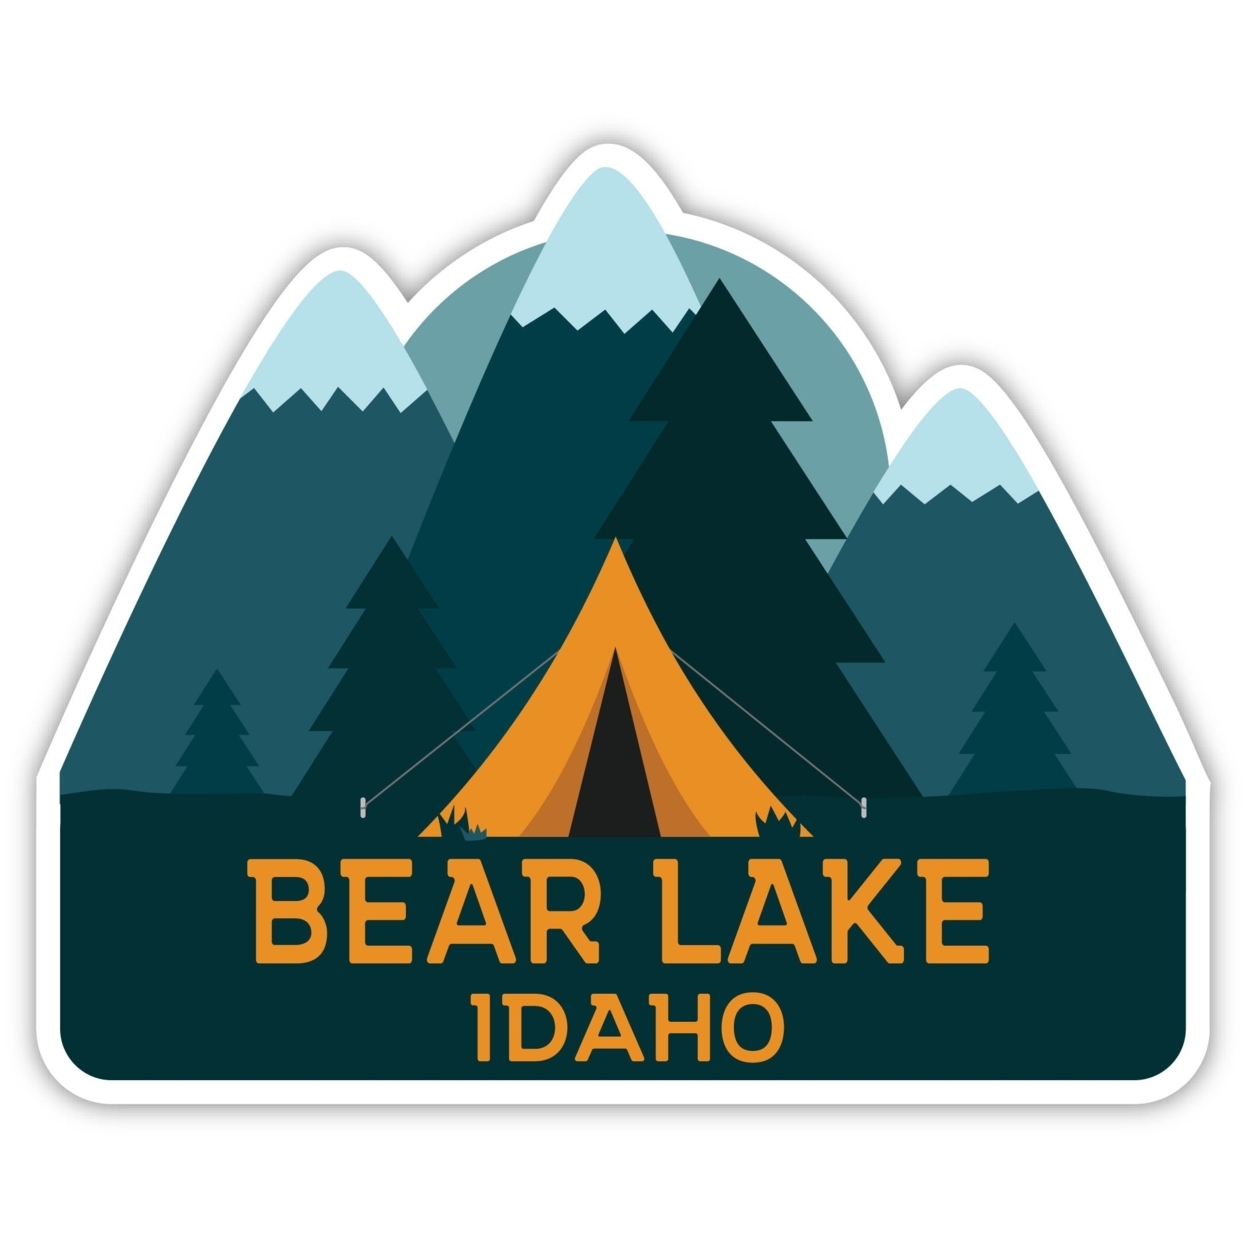 Bear Lake Idaho Souvenir Decorative Stickers (Choose Theme And Size) - 4-Pack, 4-Inch, Tent